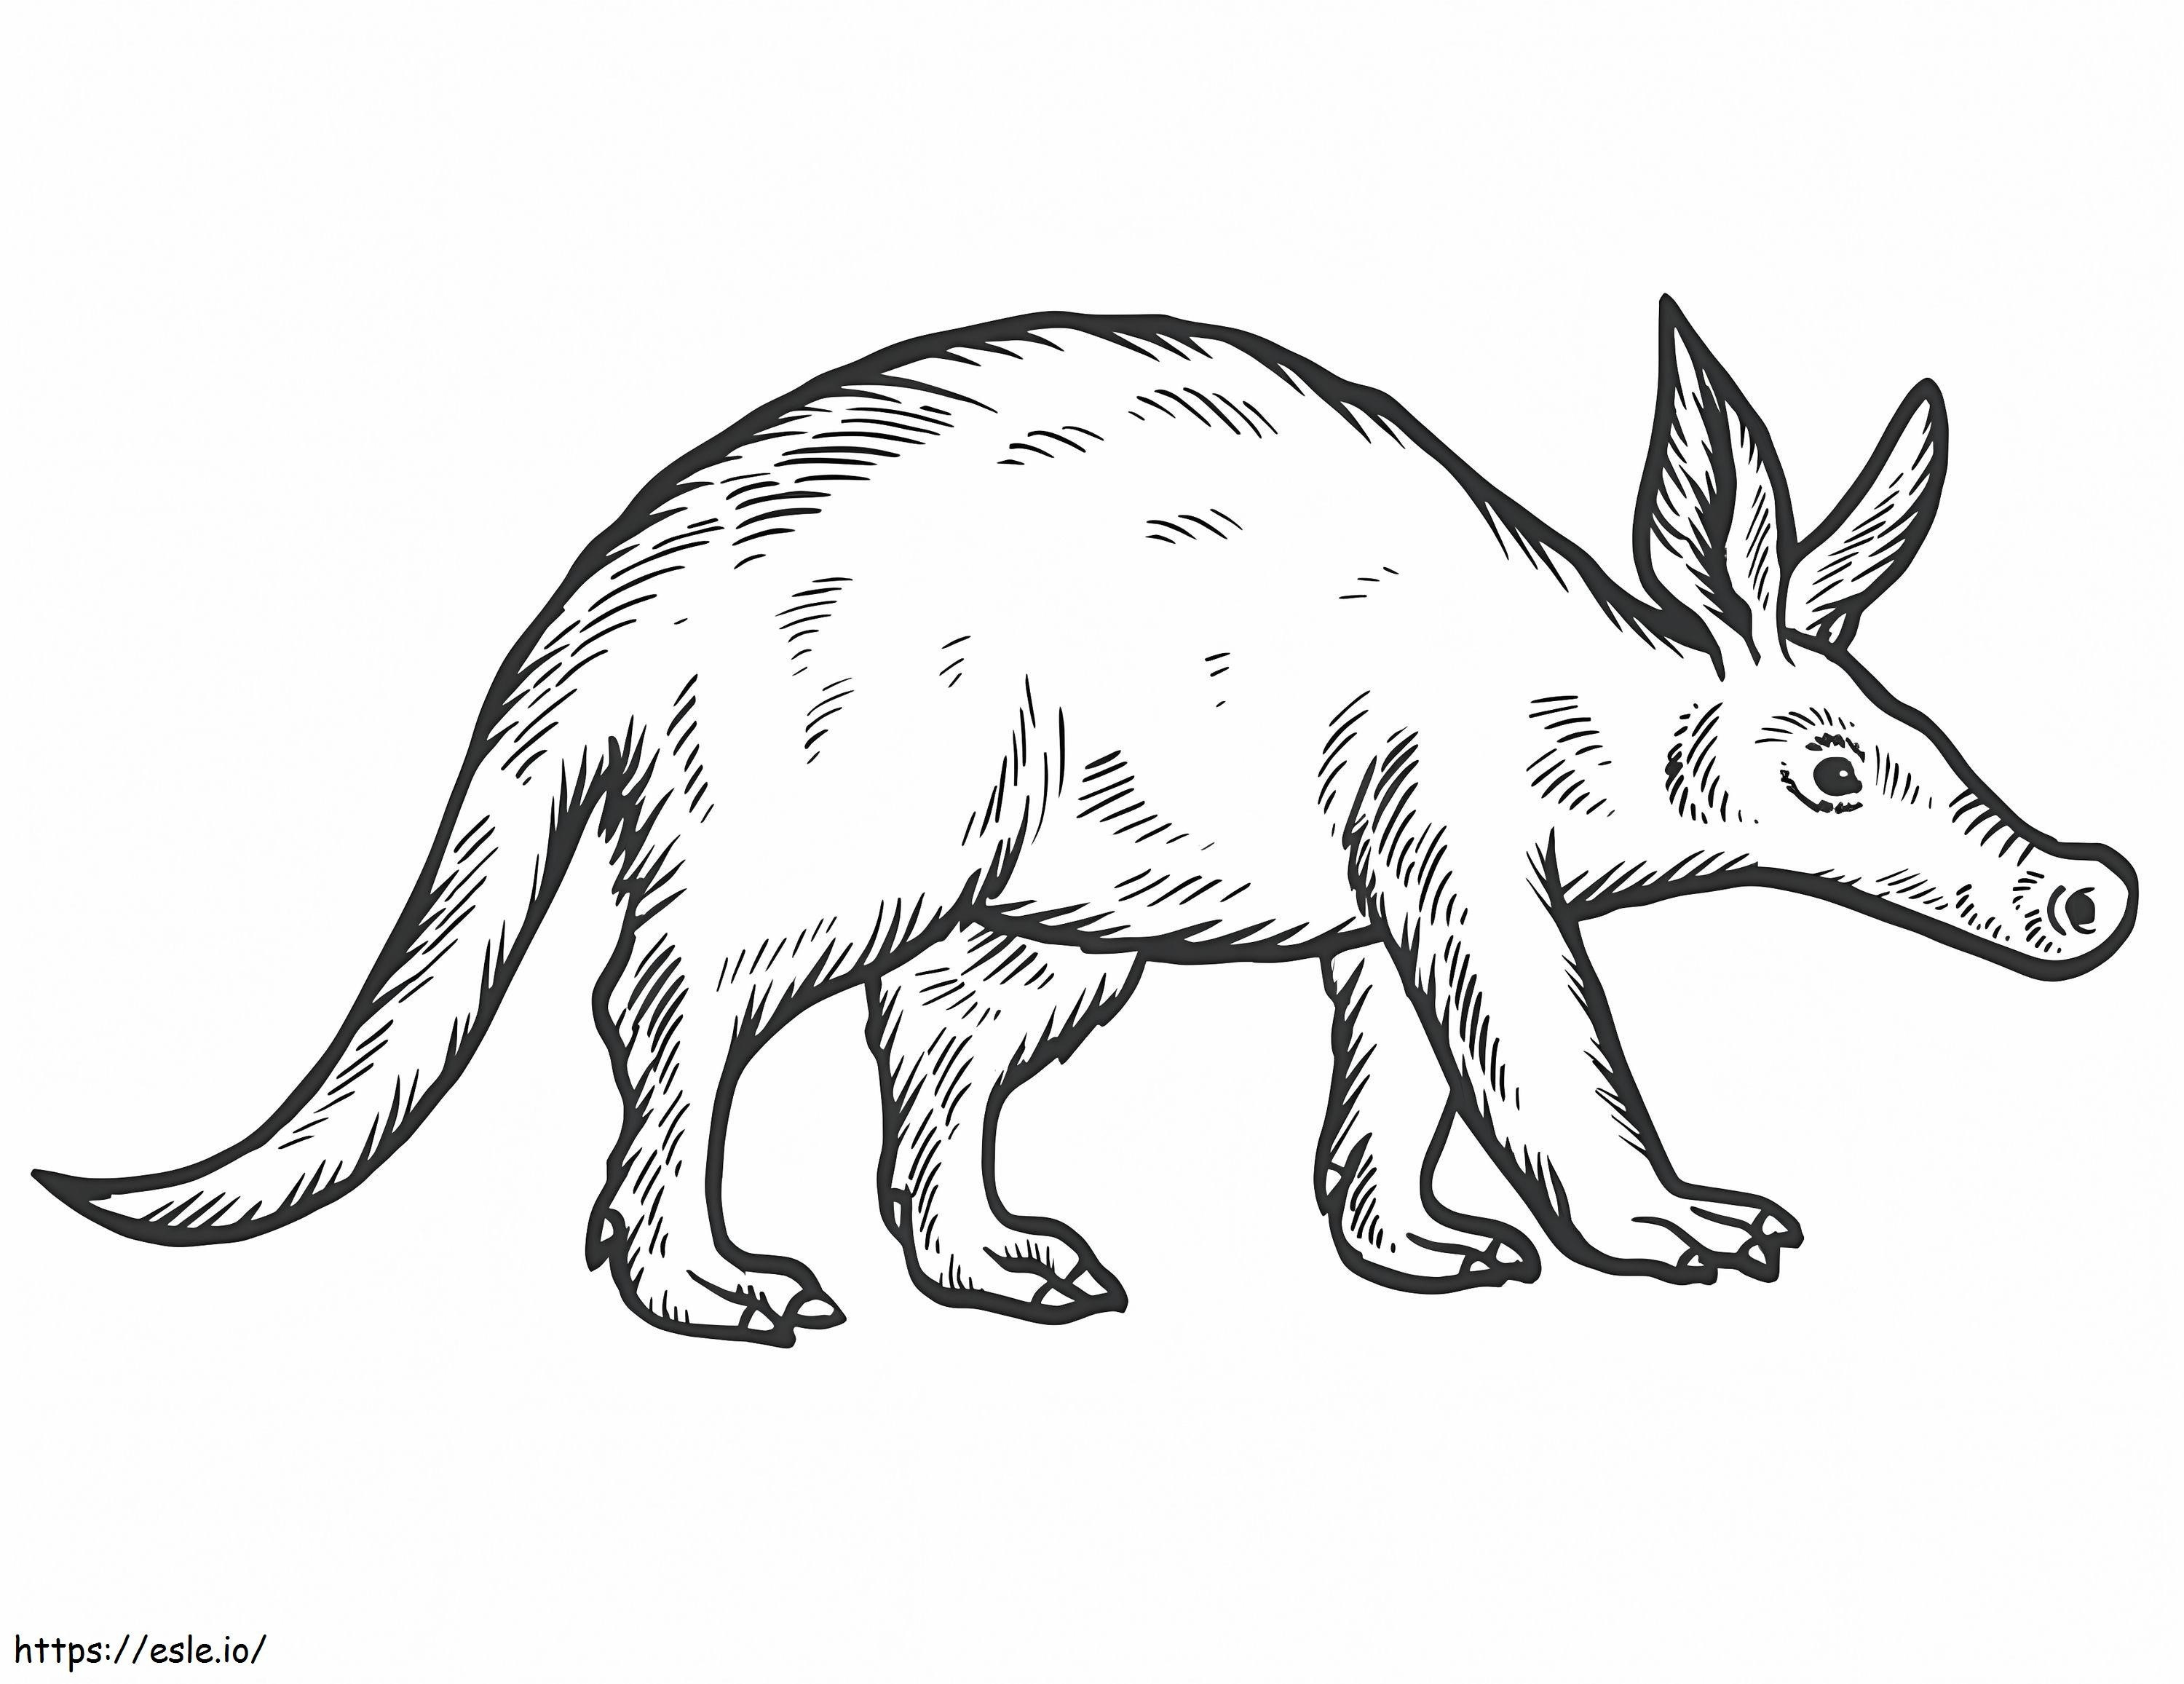 Aardvark 1 coloring page